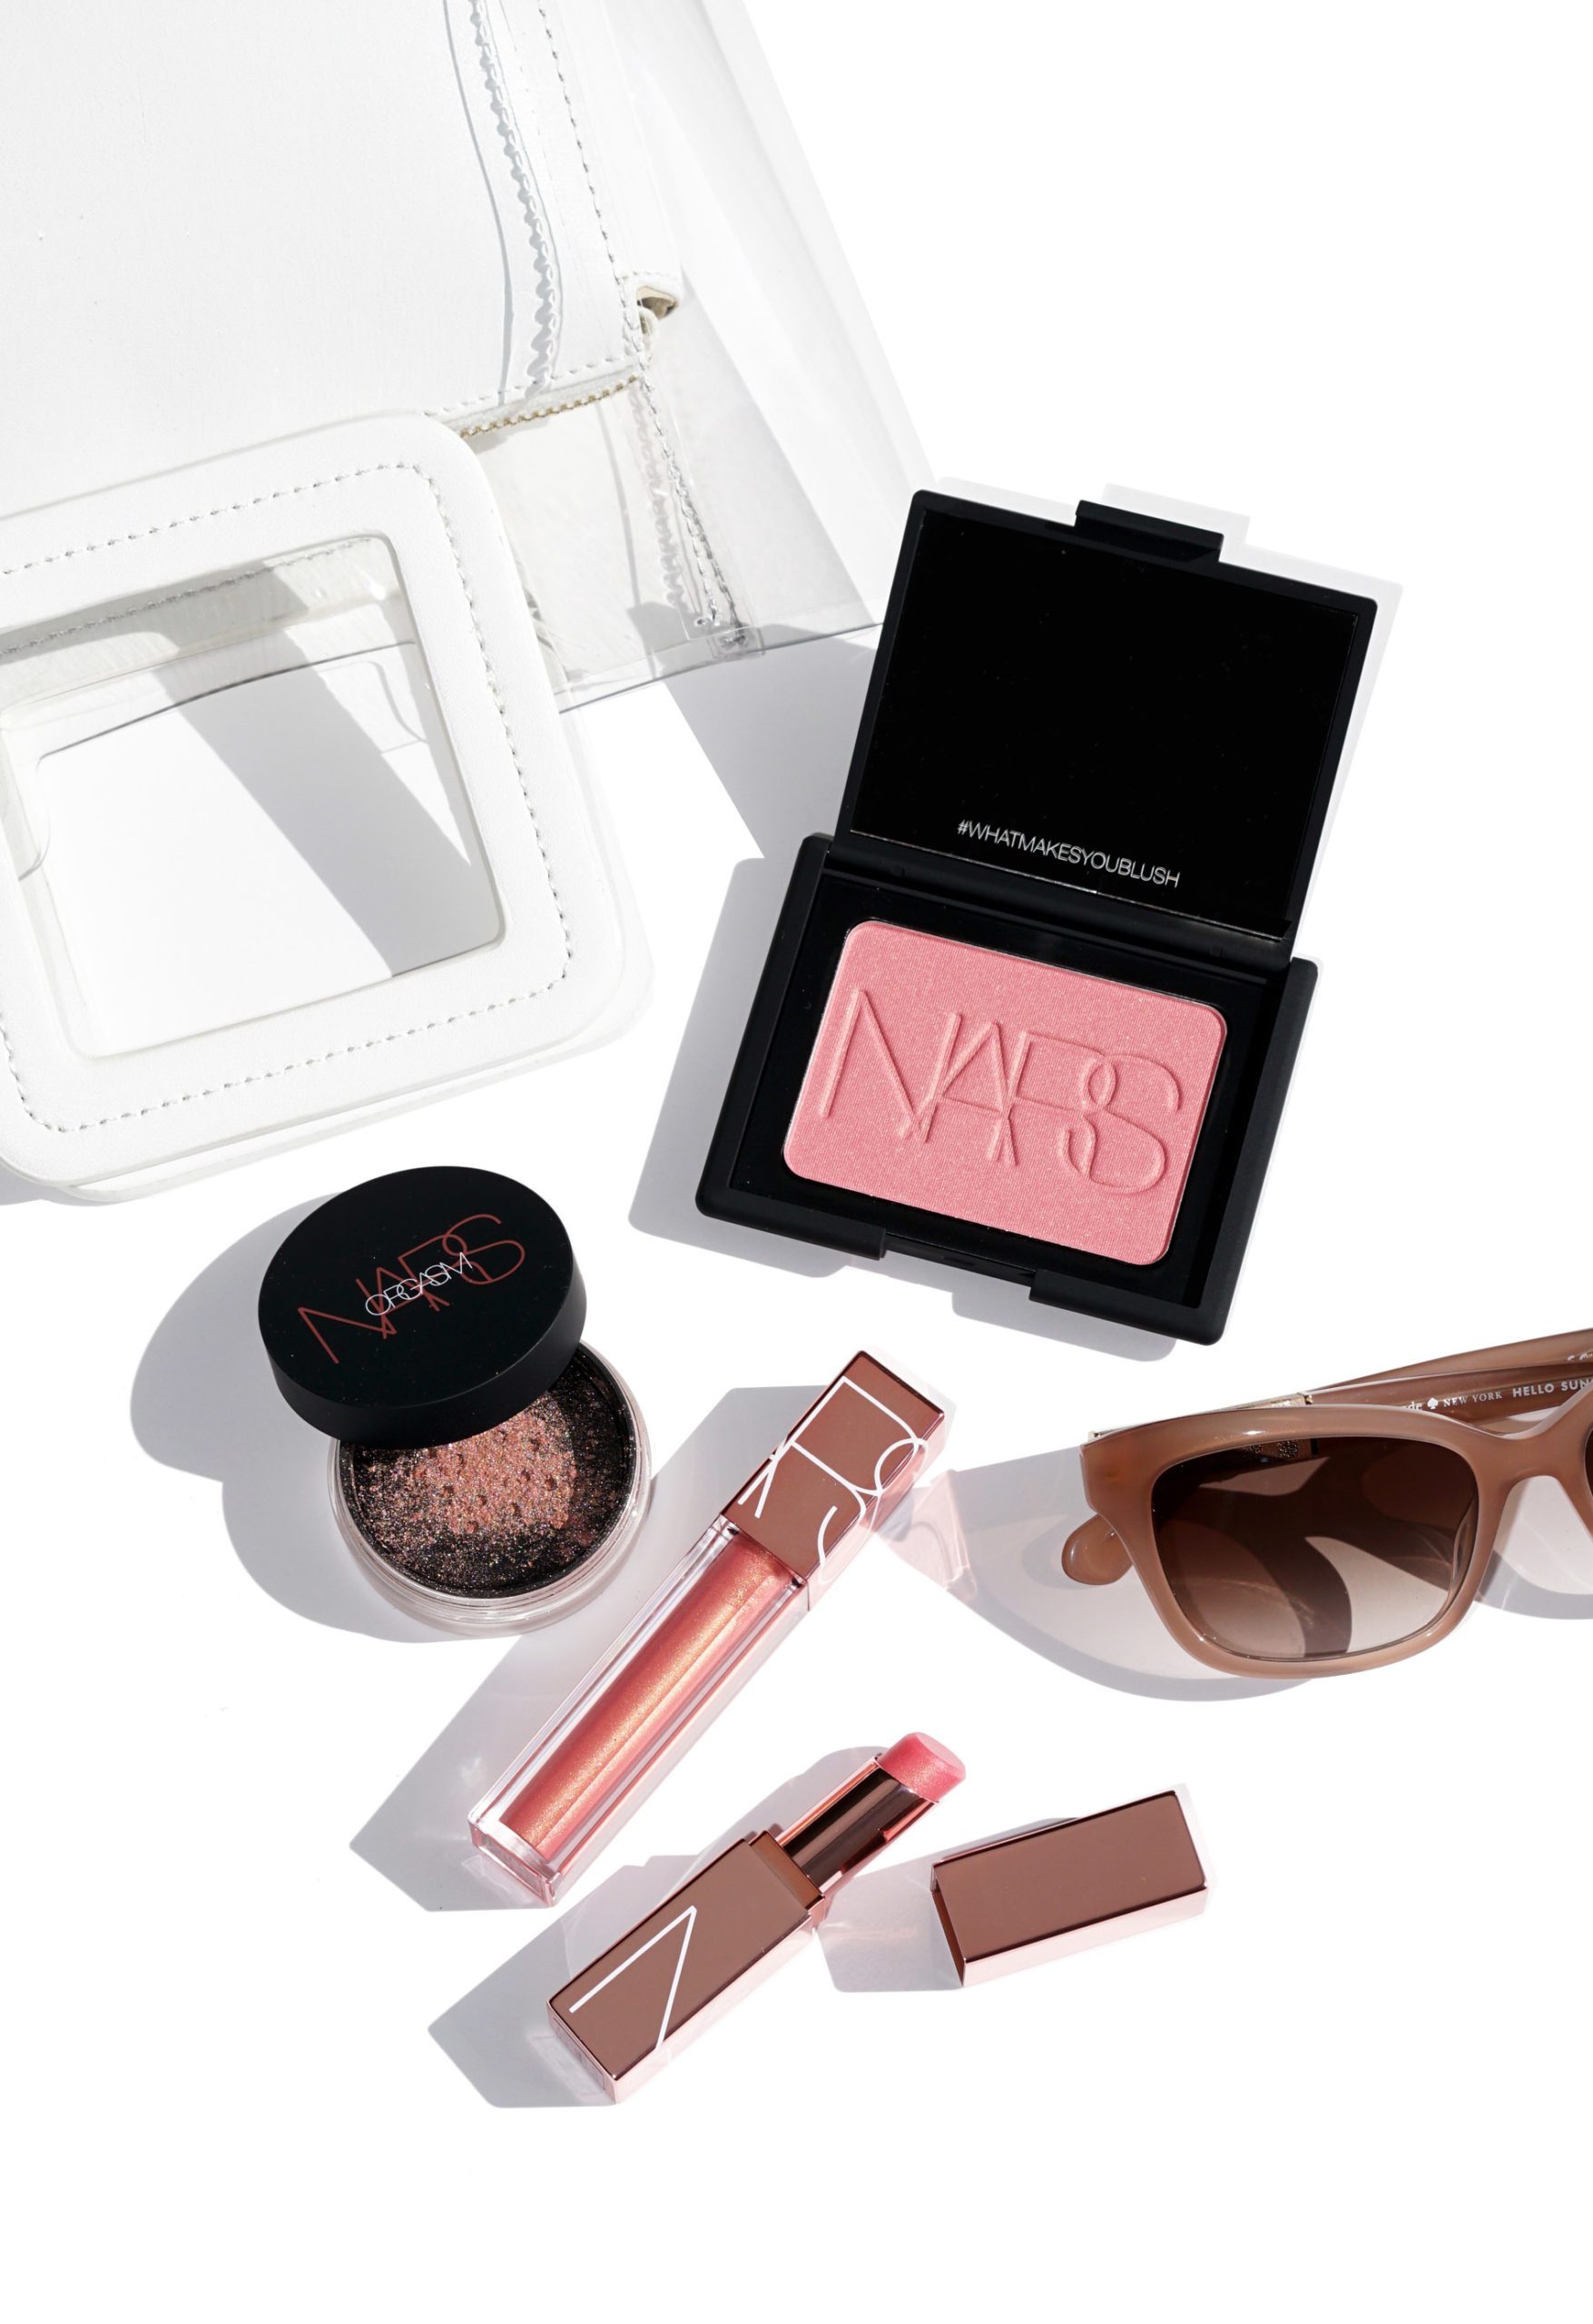 How to Pick The Perfect NARS Blush for You